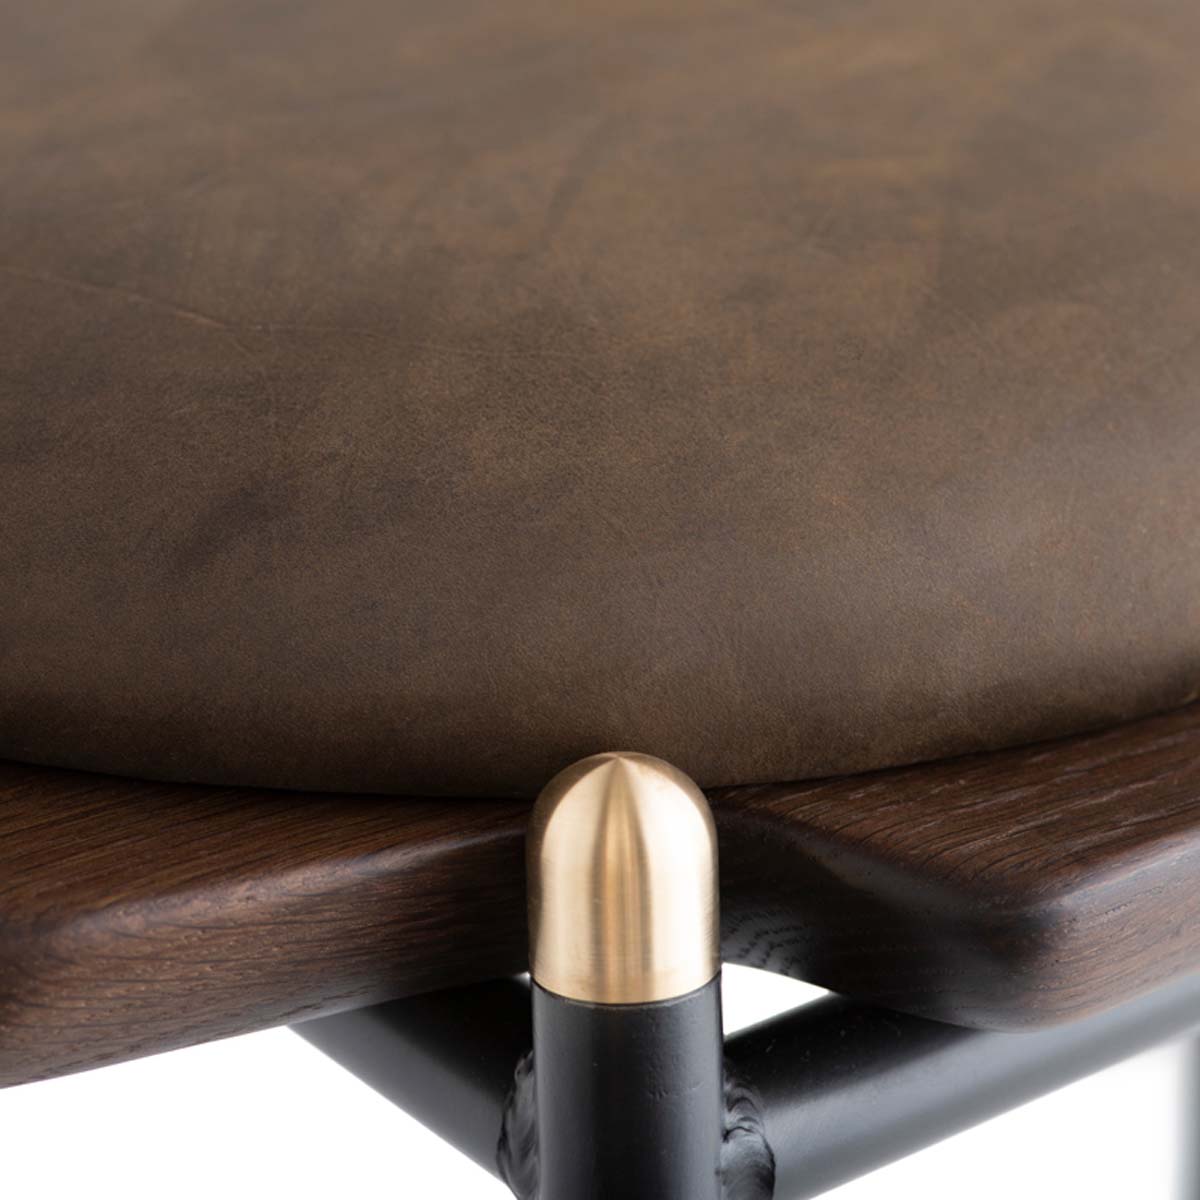 District Eight Kink Counter Stool - Smoked